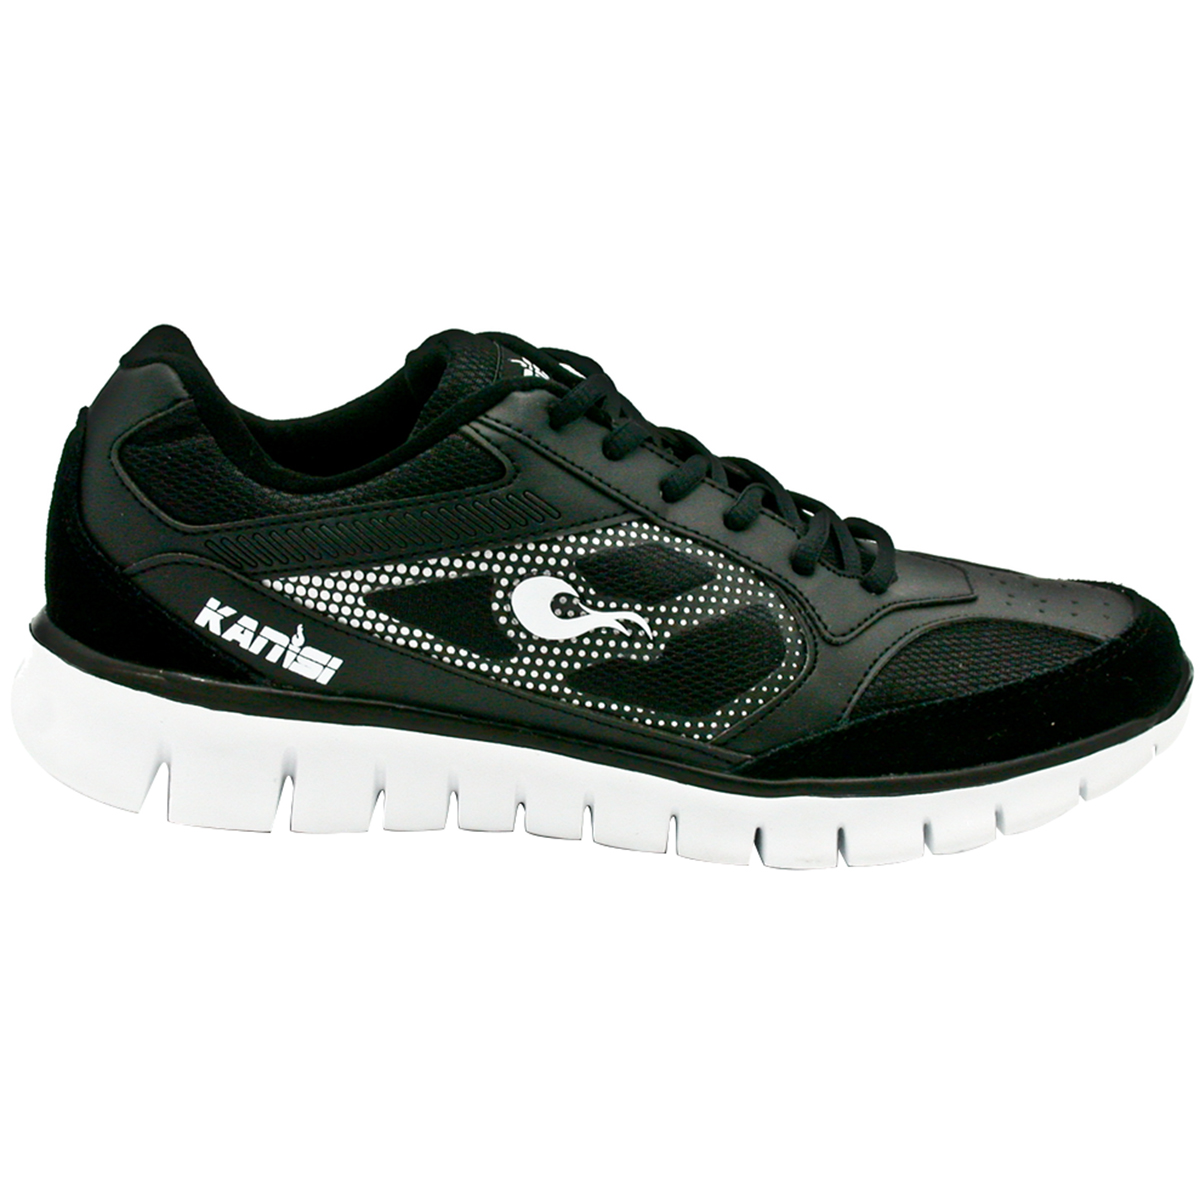 Kanisi Boxing Trainer and Running Shoes - 11 - Black/White - image 2 of 4